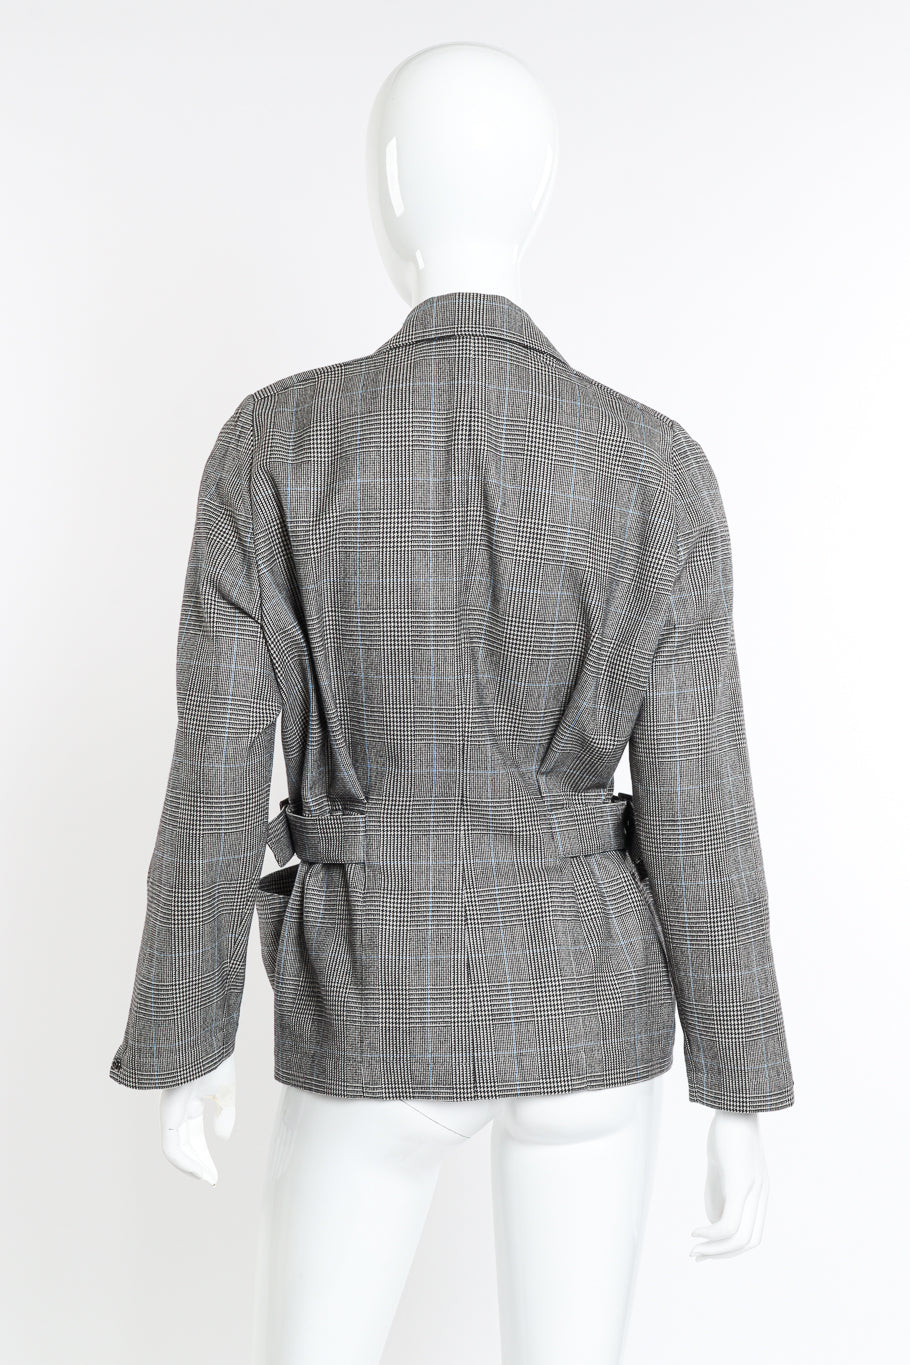 Houndstooth Peplum Jacket by Thierry Mugler on mannequin back @recess la